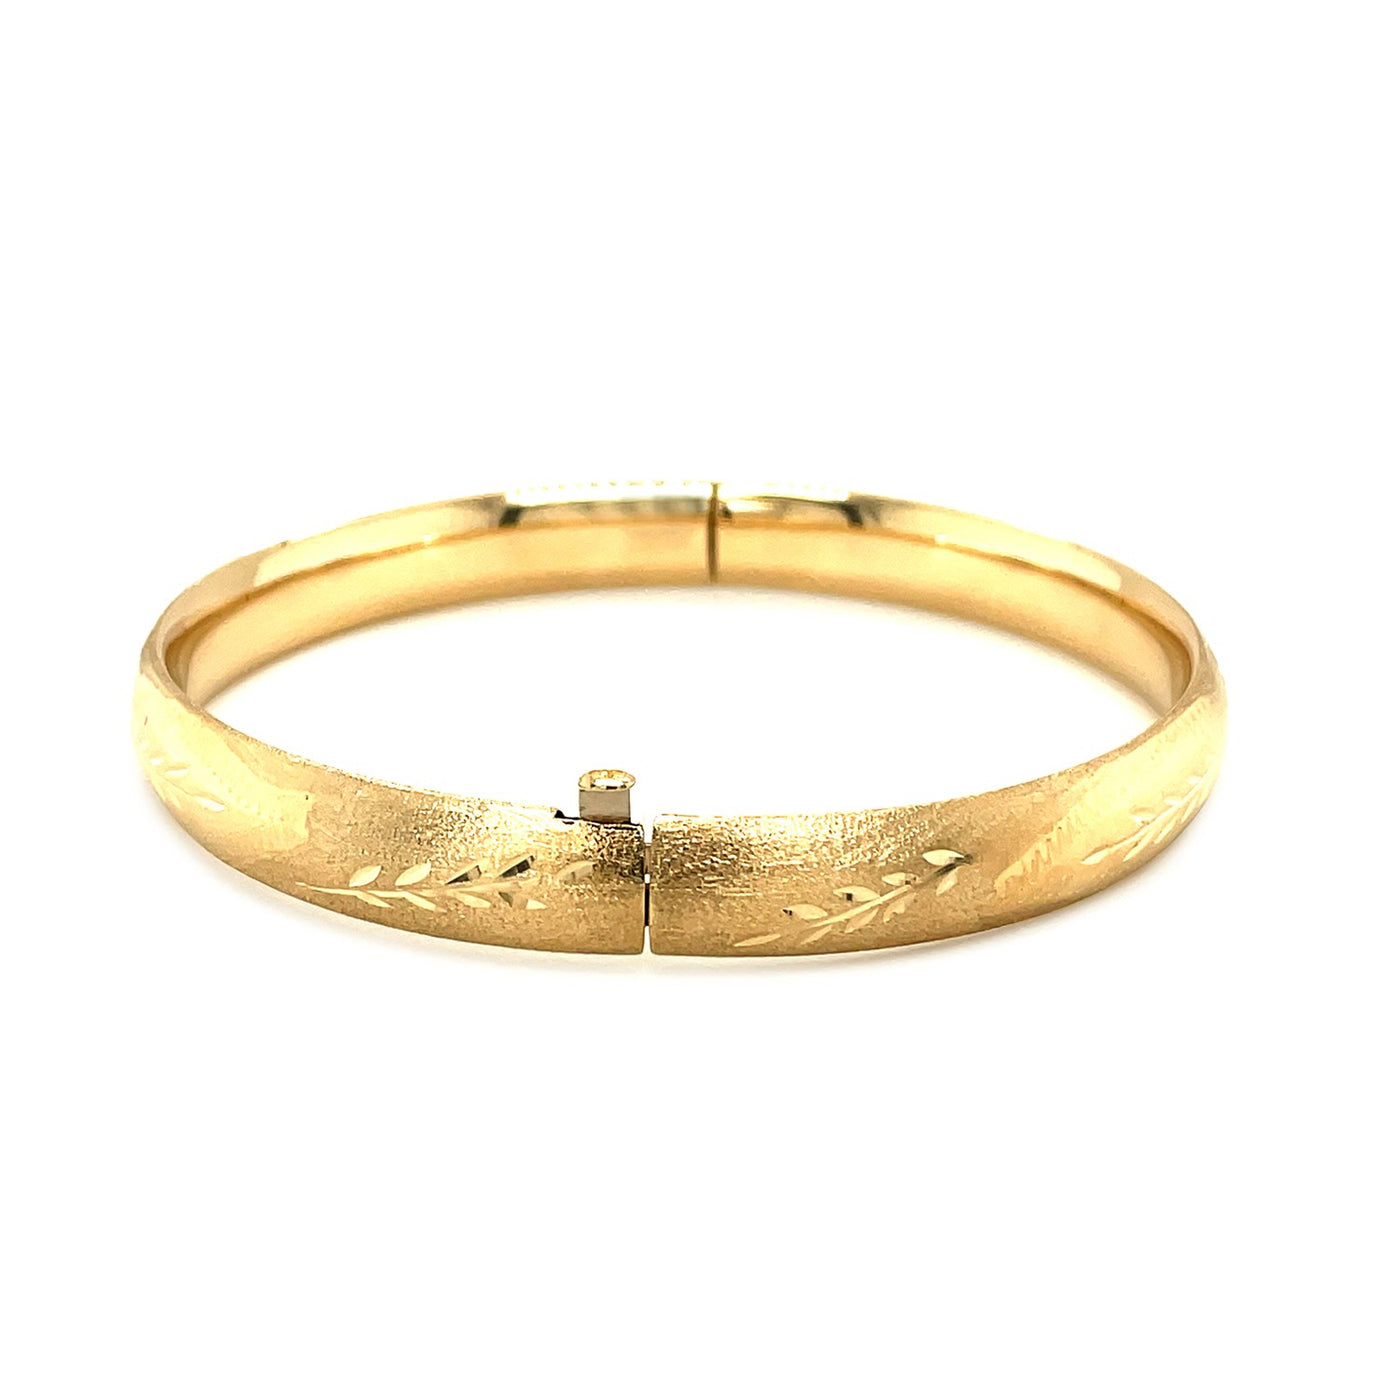 The Classic Floral Cut Bangle 8mm